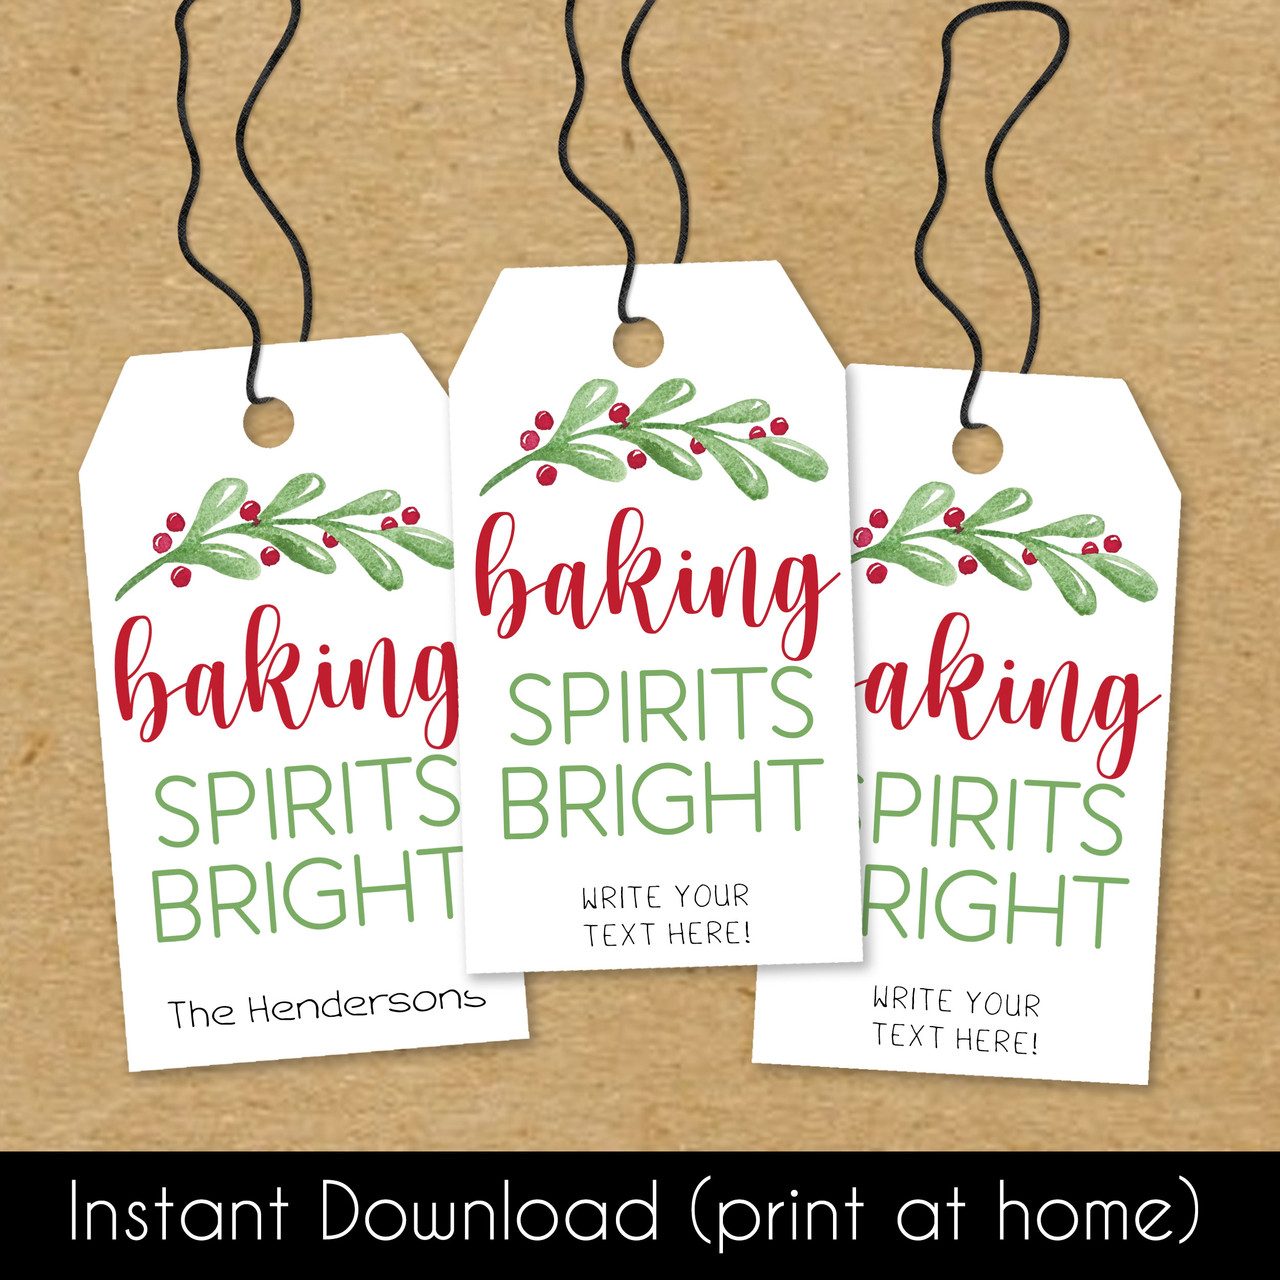 Bright School Year Gift Tag, Printable PDF - My Party Design